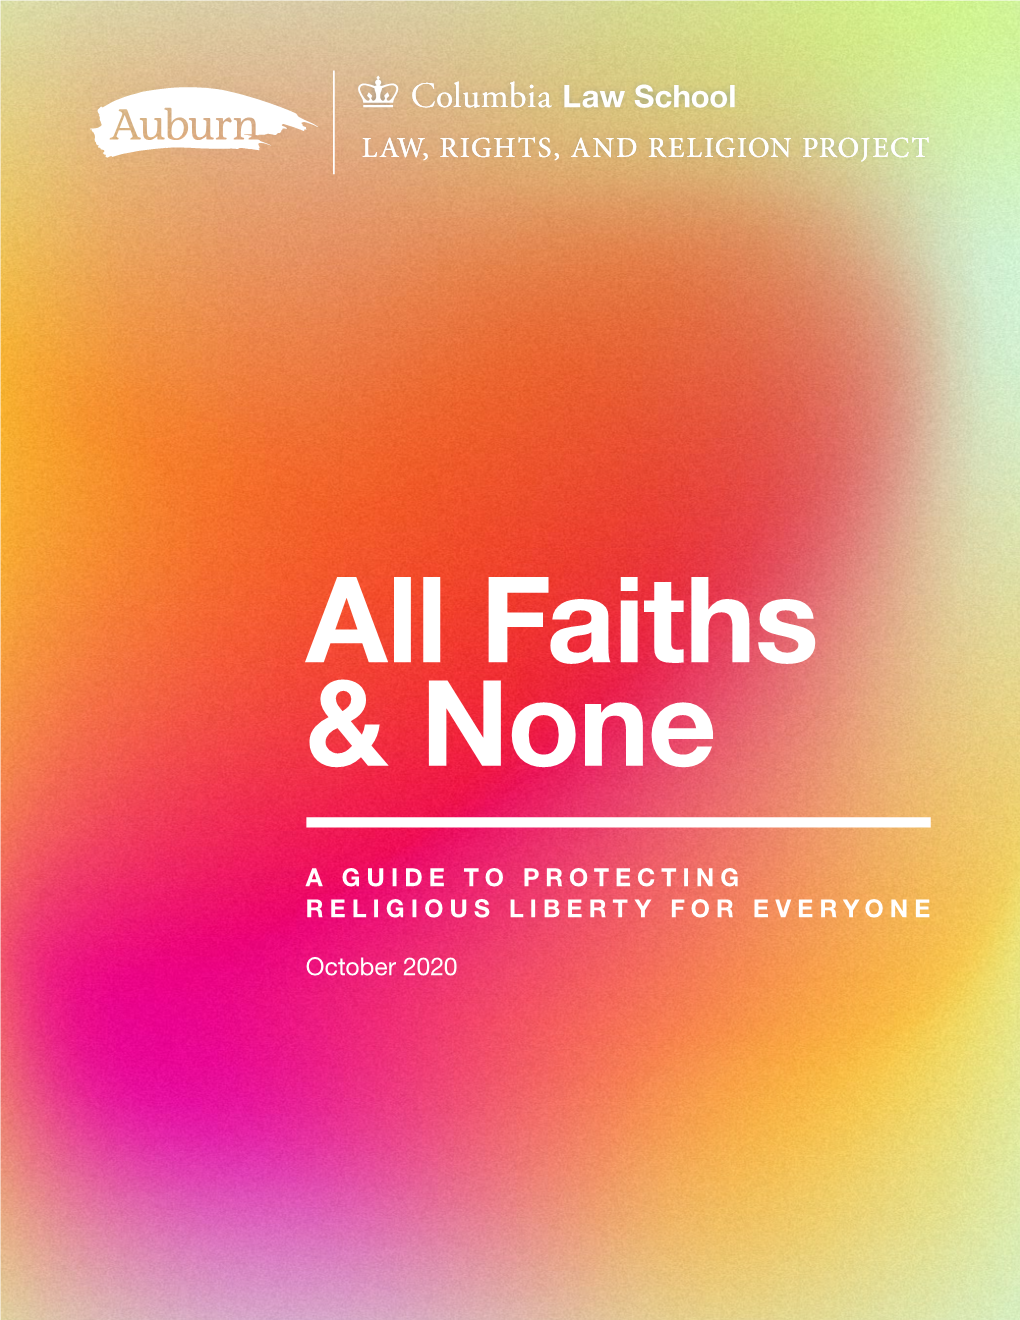 A Guide to Protecting Religious Liberty for Everyone